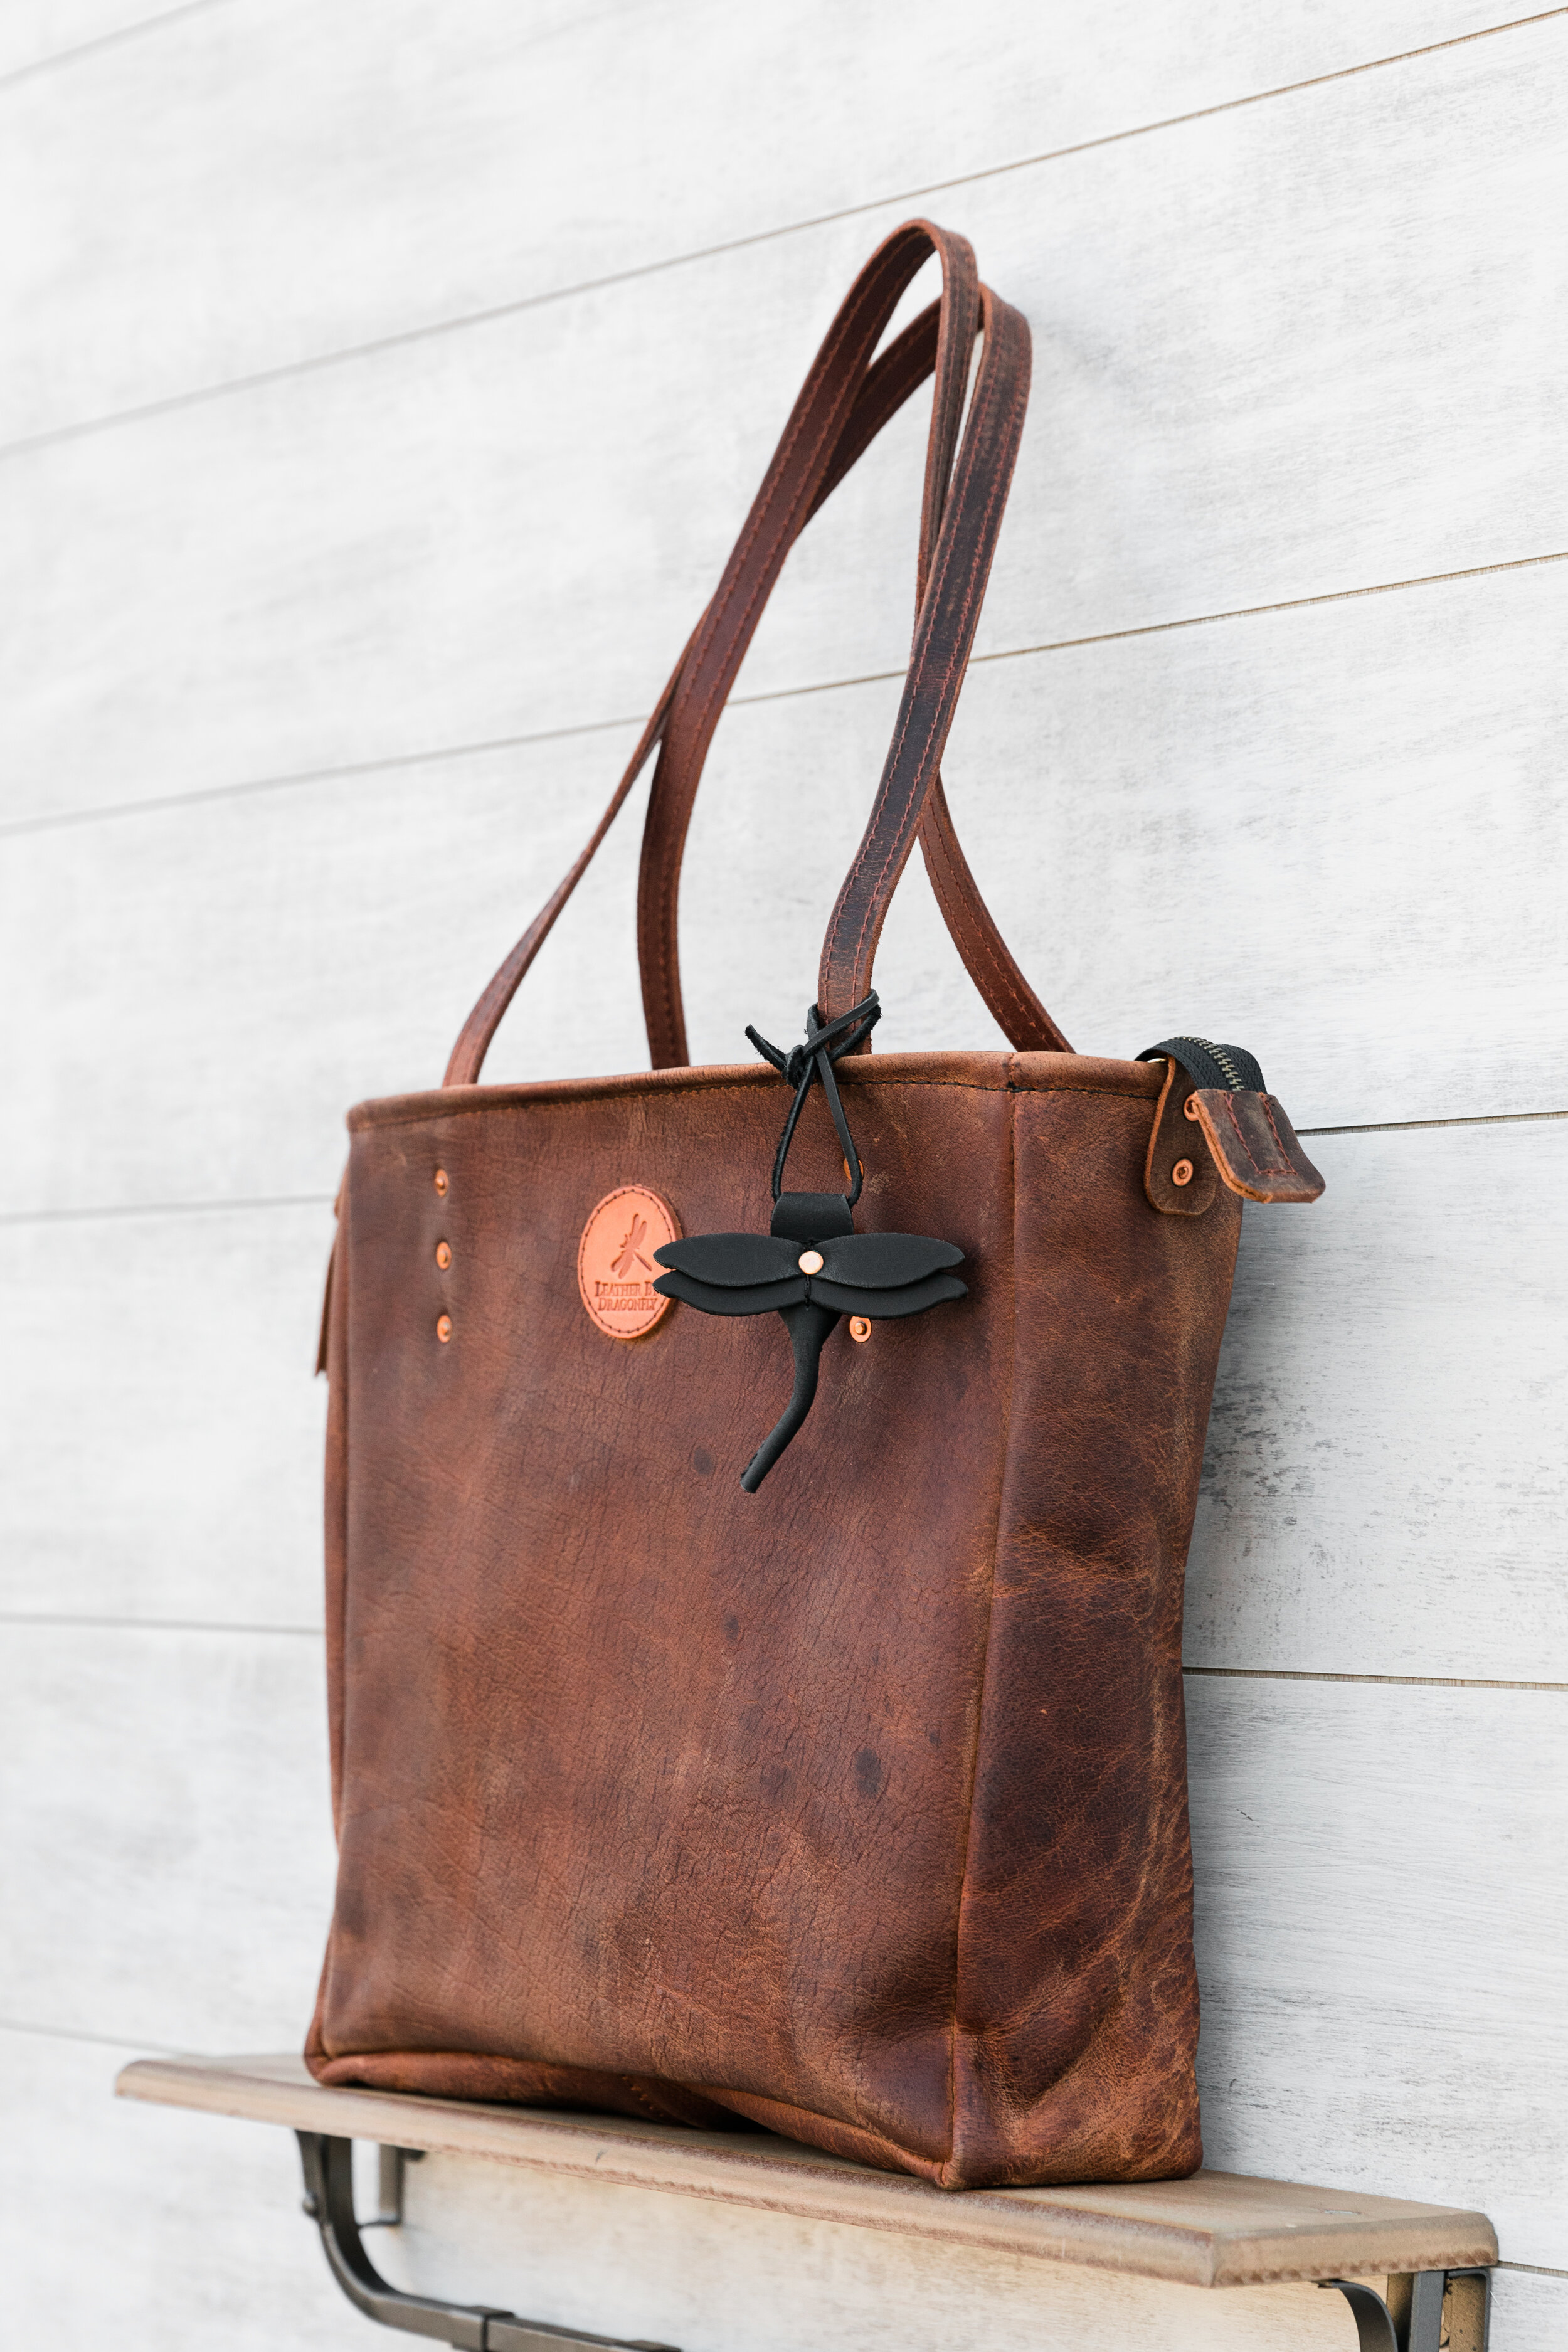 Merci Marie distressed Tote leather bag